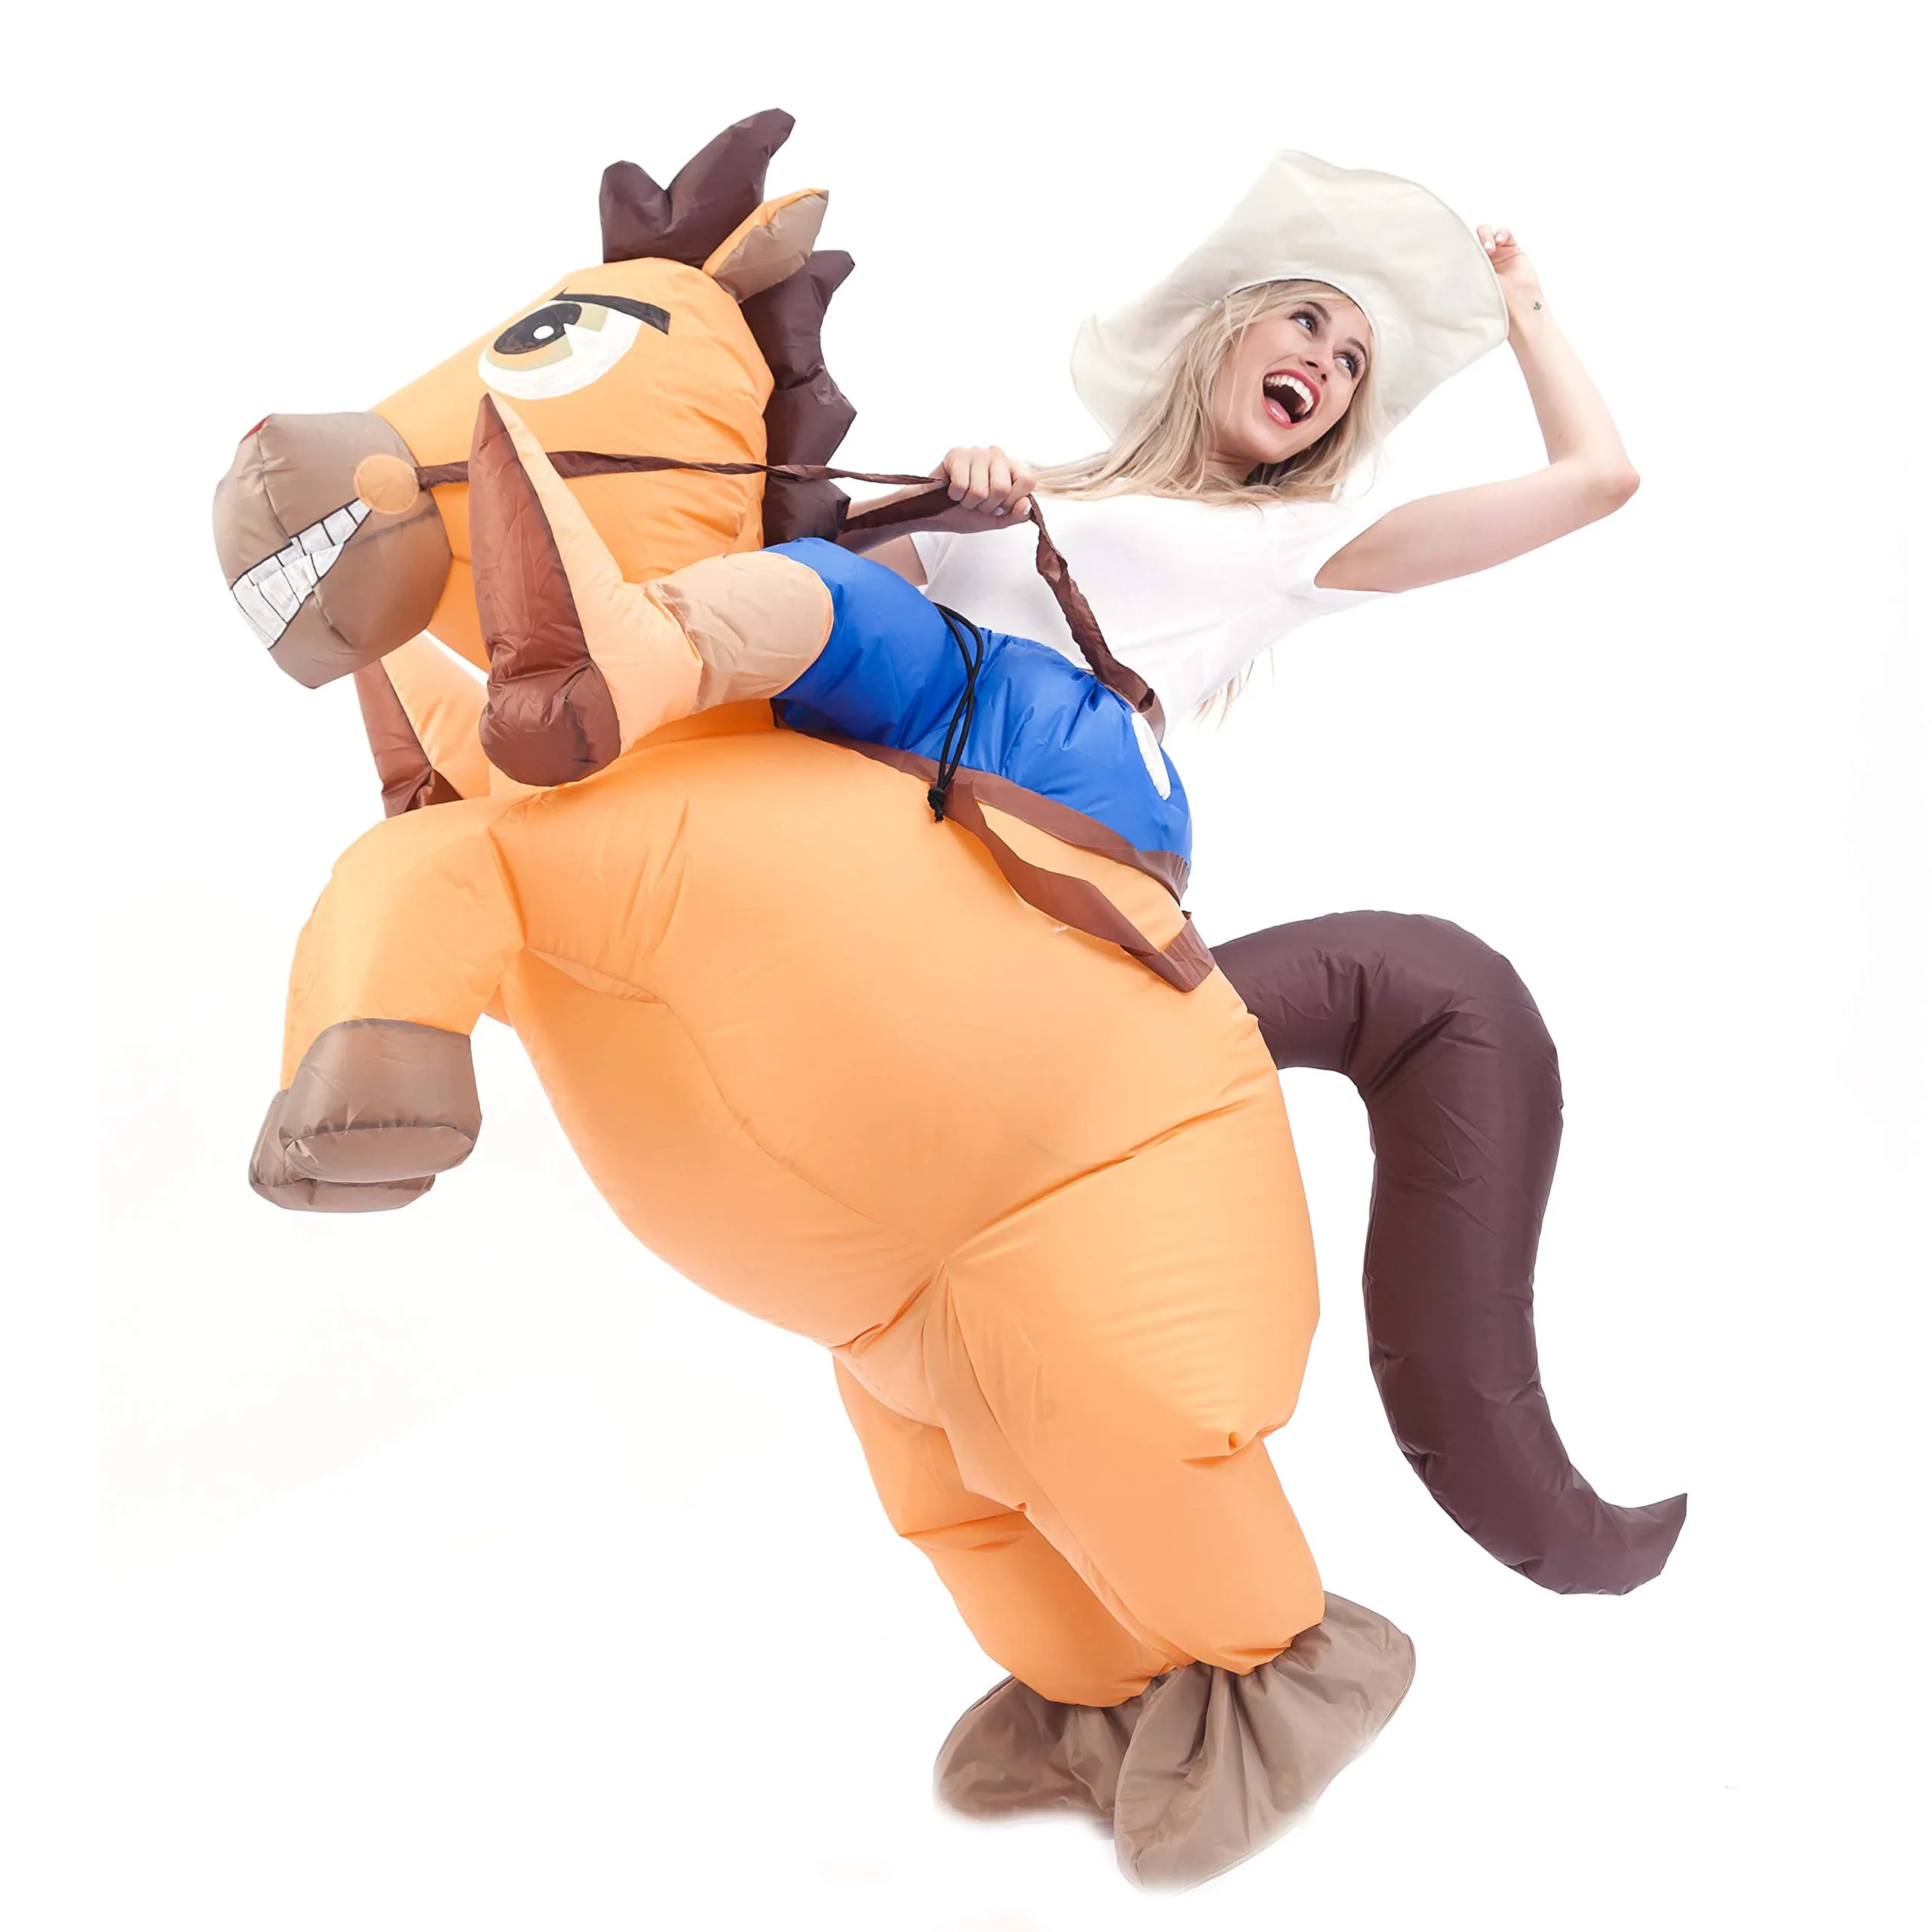 Adult inflatable cowboy costume